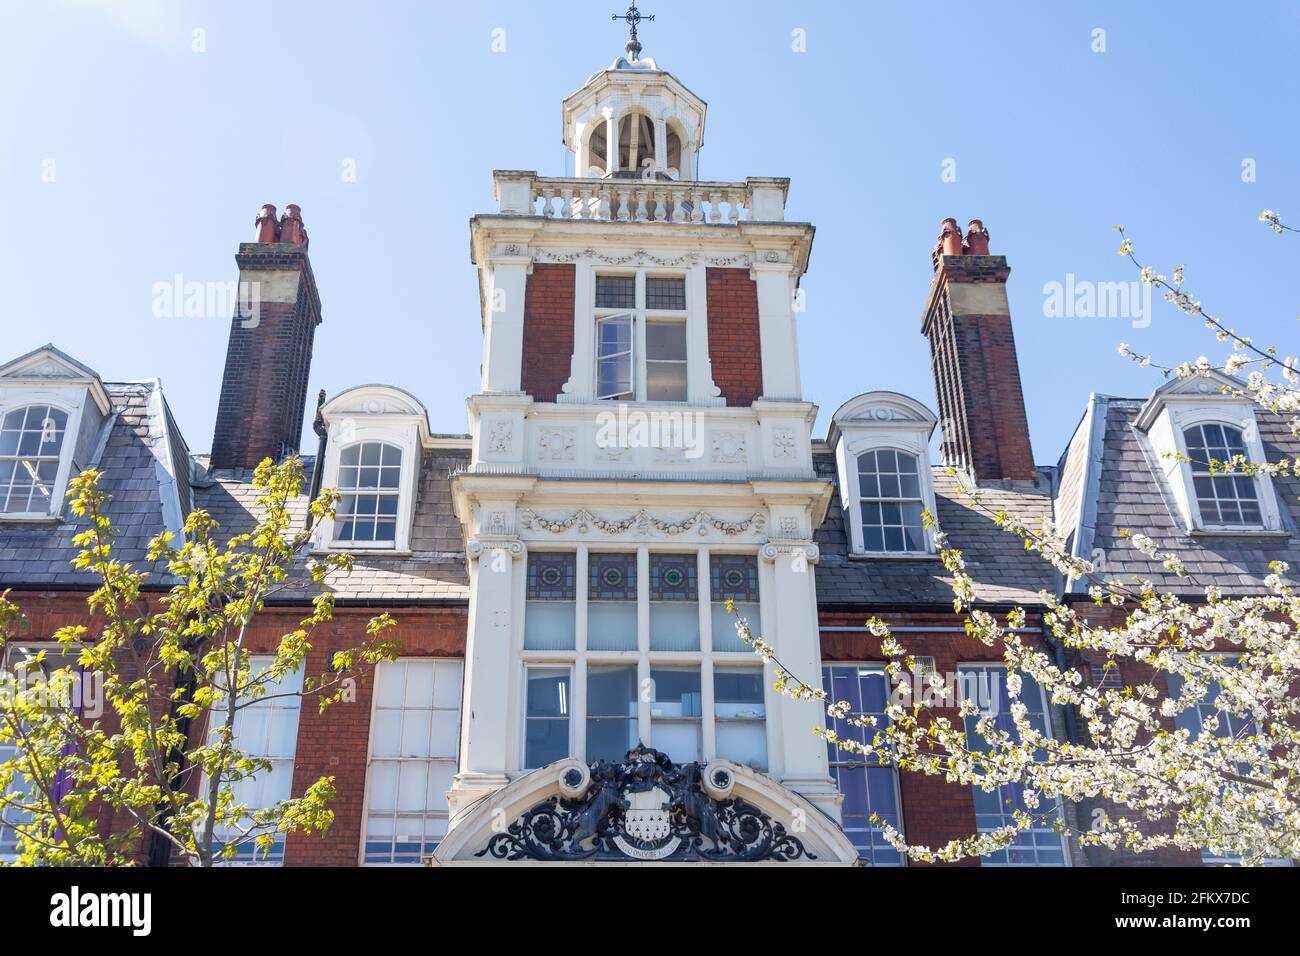 Façade d'époque, Beis Ruchel d'atmar School, Stamford Hill Road, Stamford Hill, London Borough of Hackney, Greater London, Angleterre, Royaume-Uni Banque D'Images